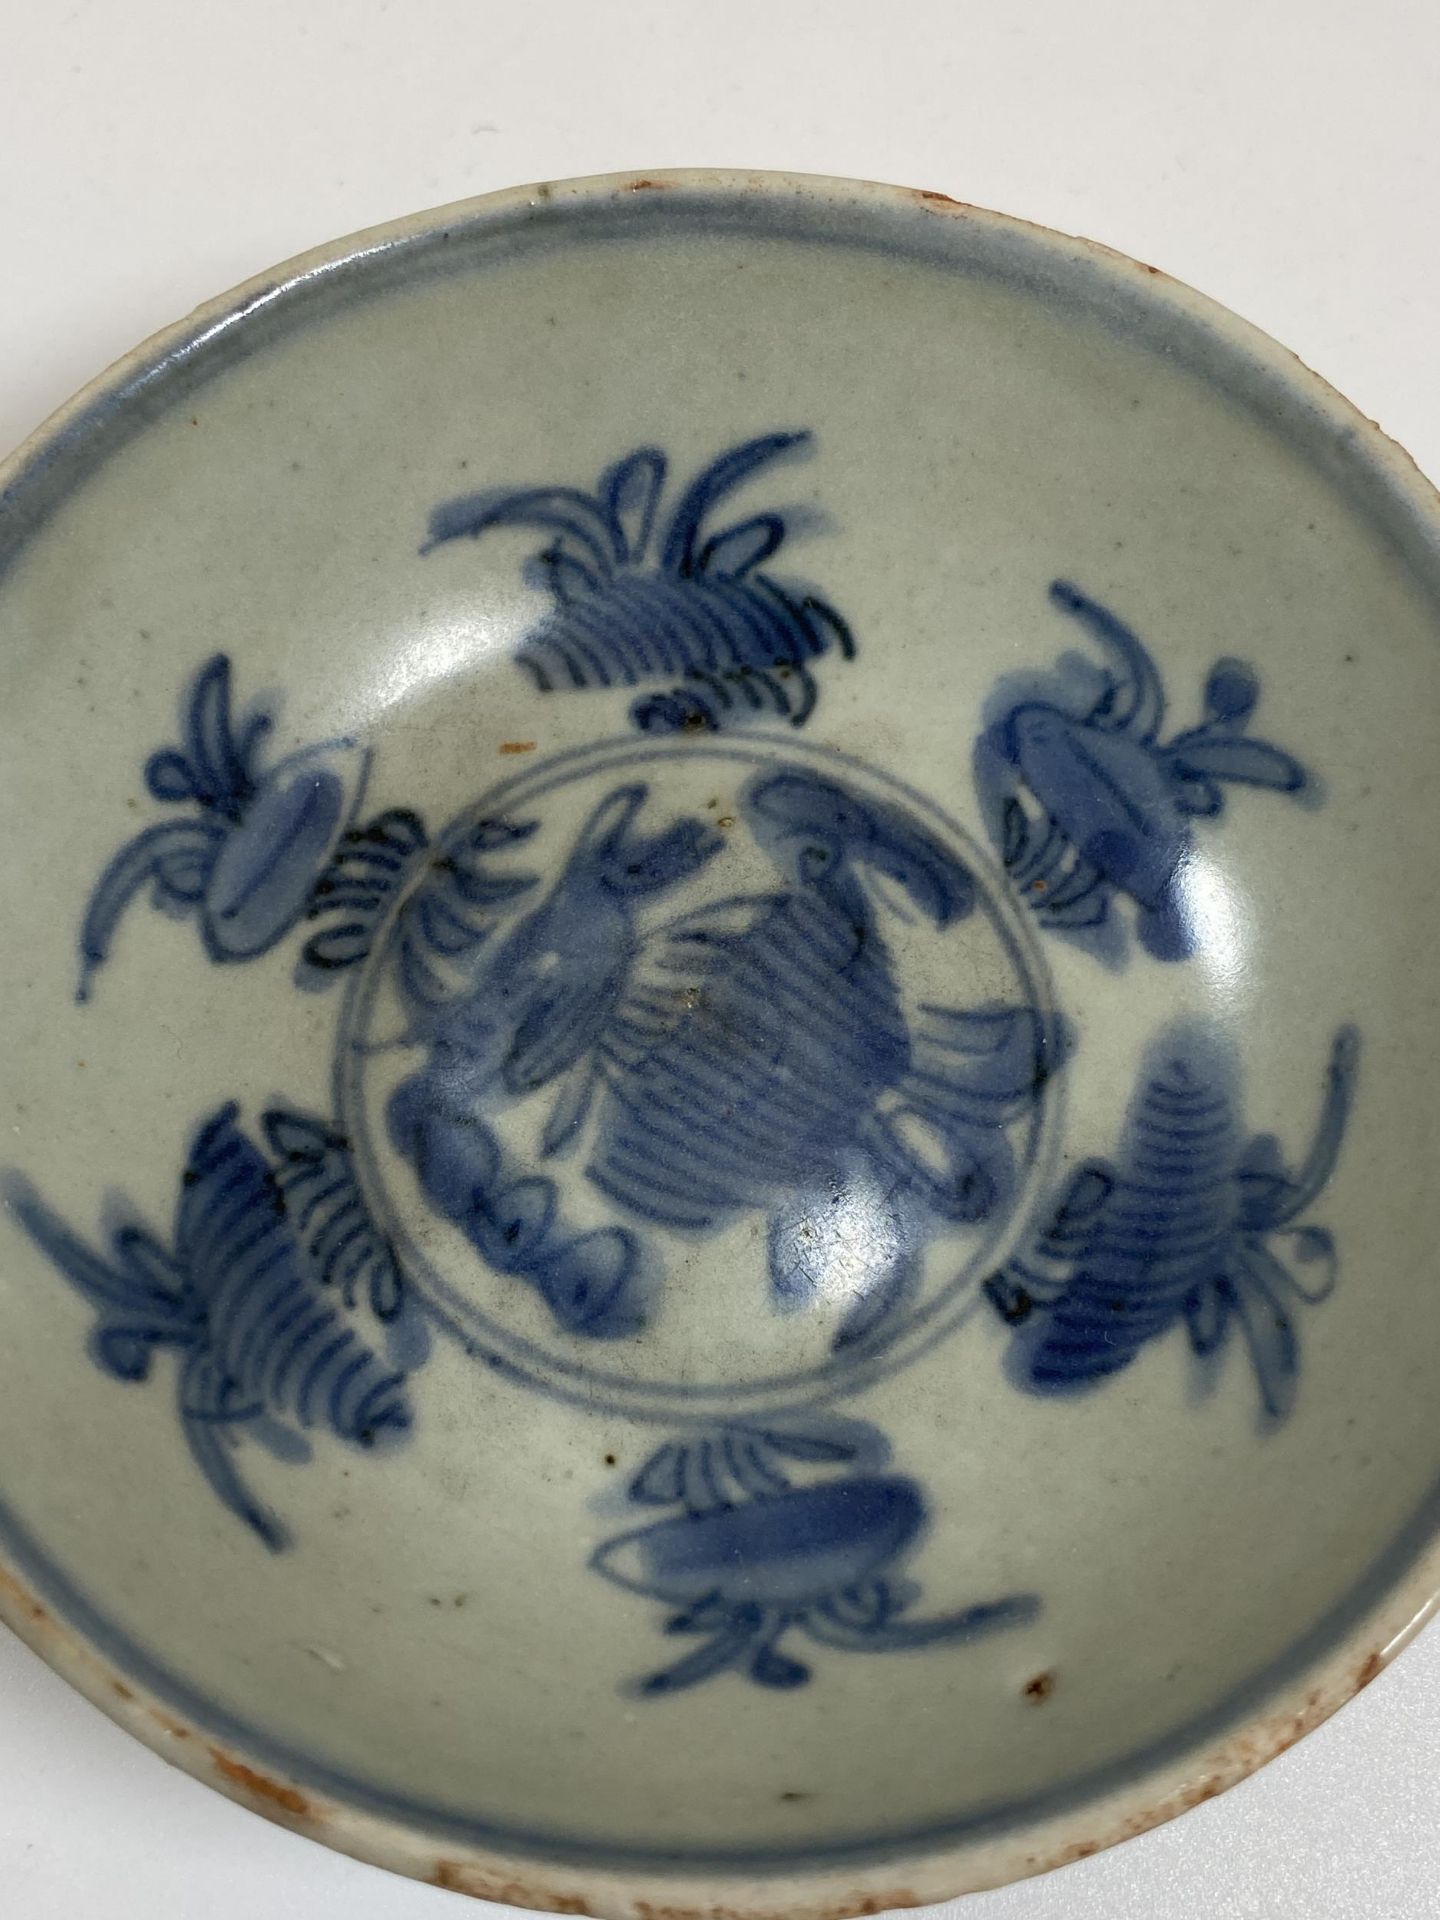 A BELIEVED MING DYNASTY CHINESE BLUE AND WHITE PORCELAIN BOWL, DIAMETER 11CM - Image 3 of 7